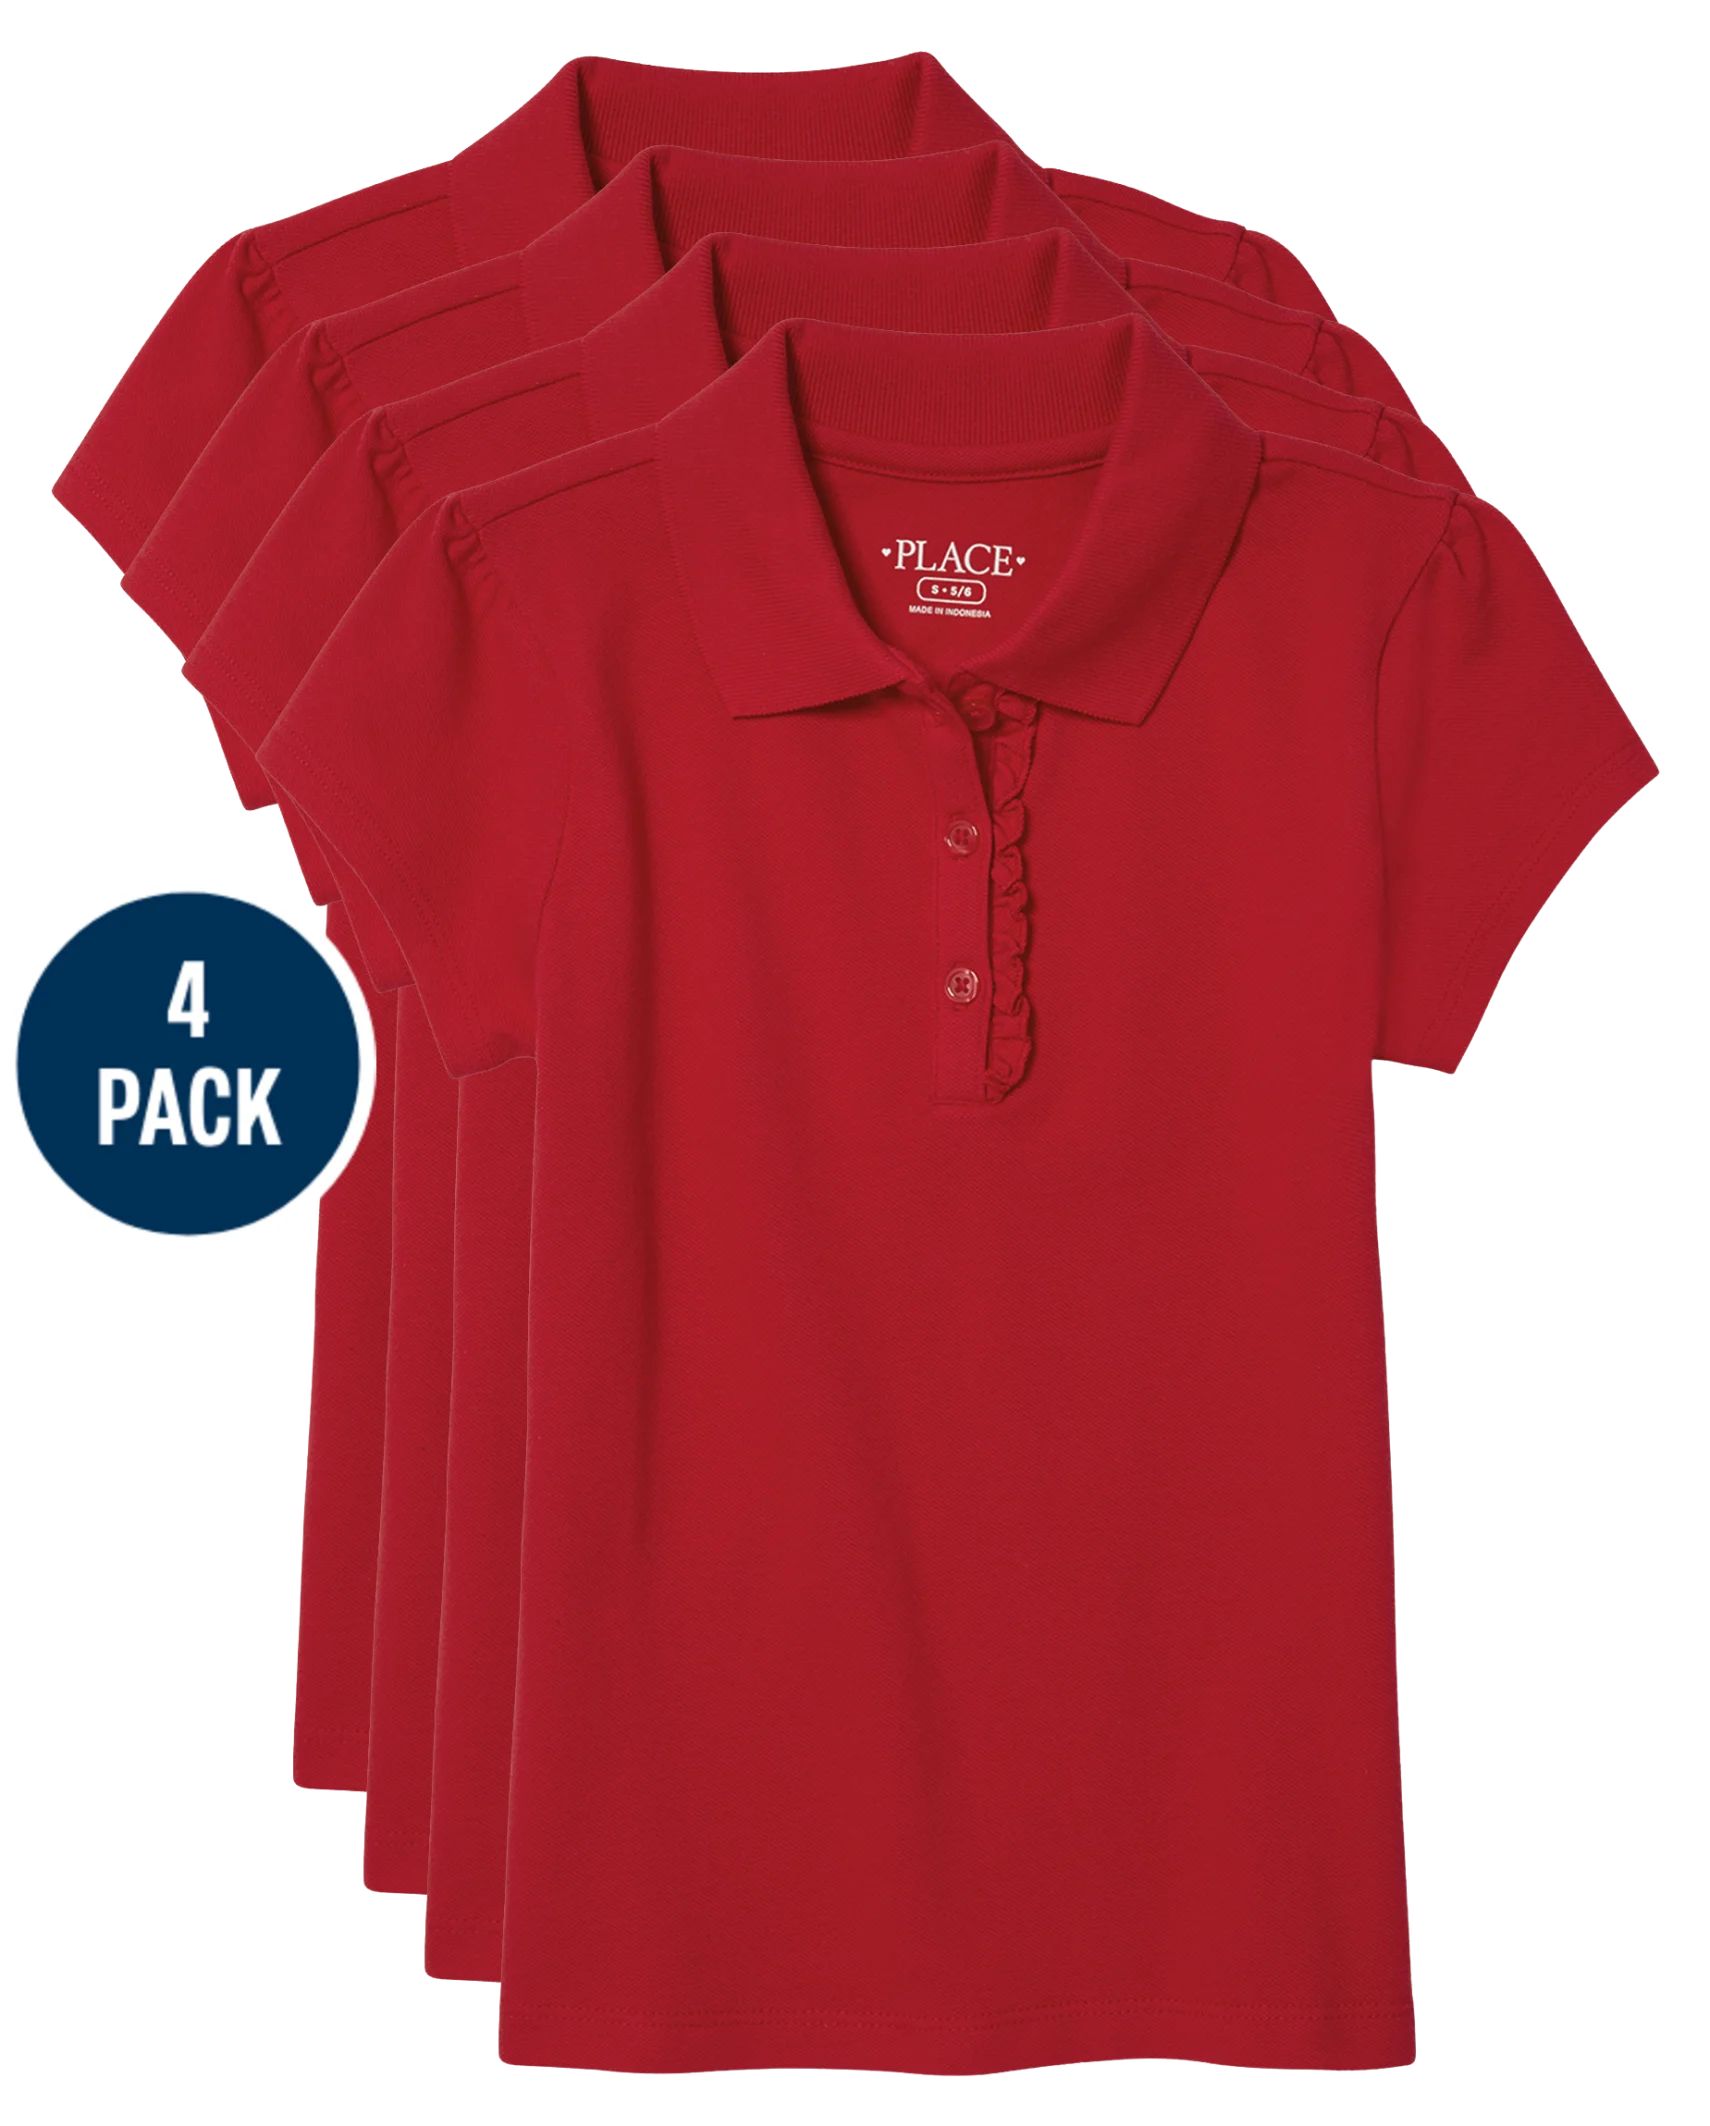 Girls Uniform Ruffle Pique Polo 4-Pack - ruby | The Children's Place